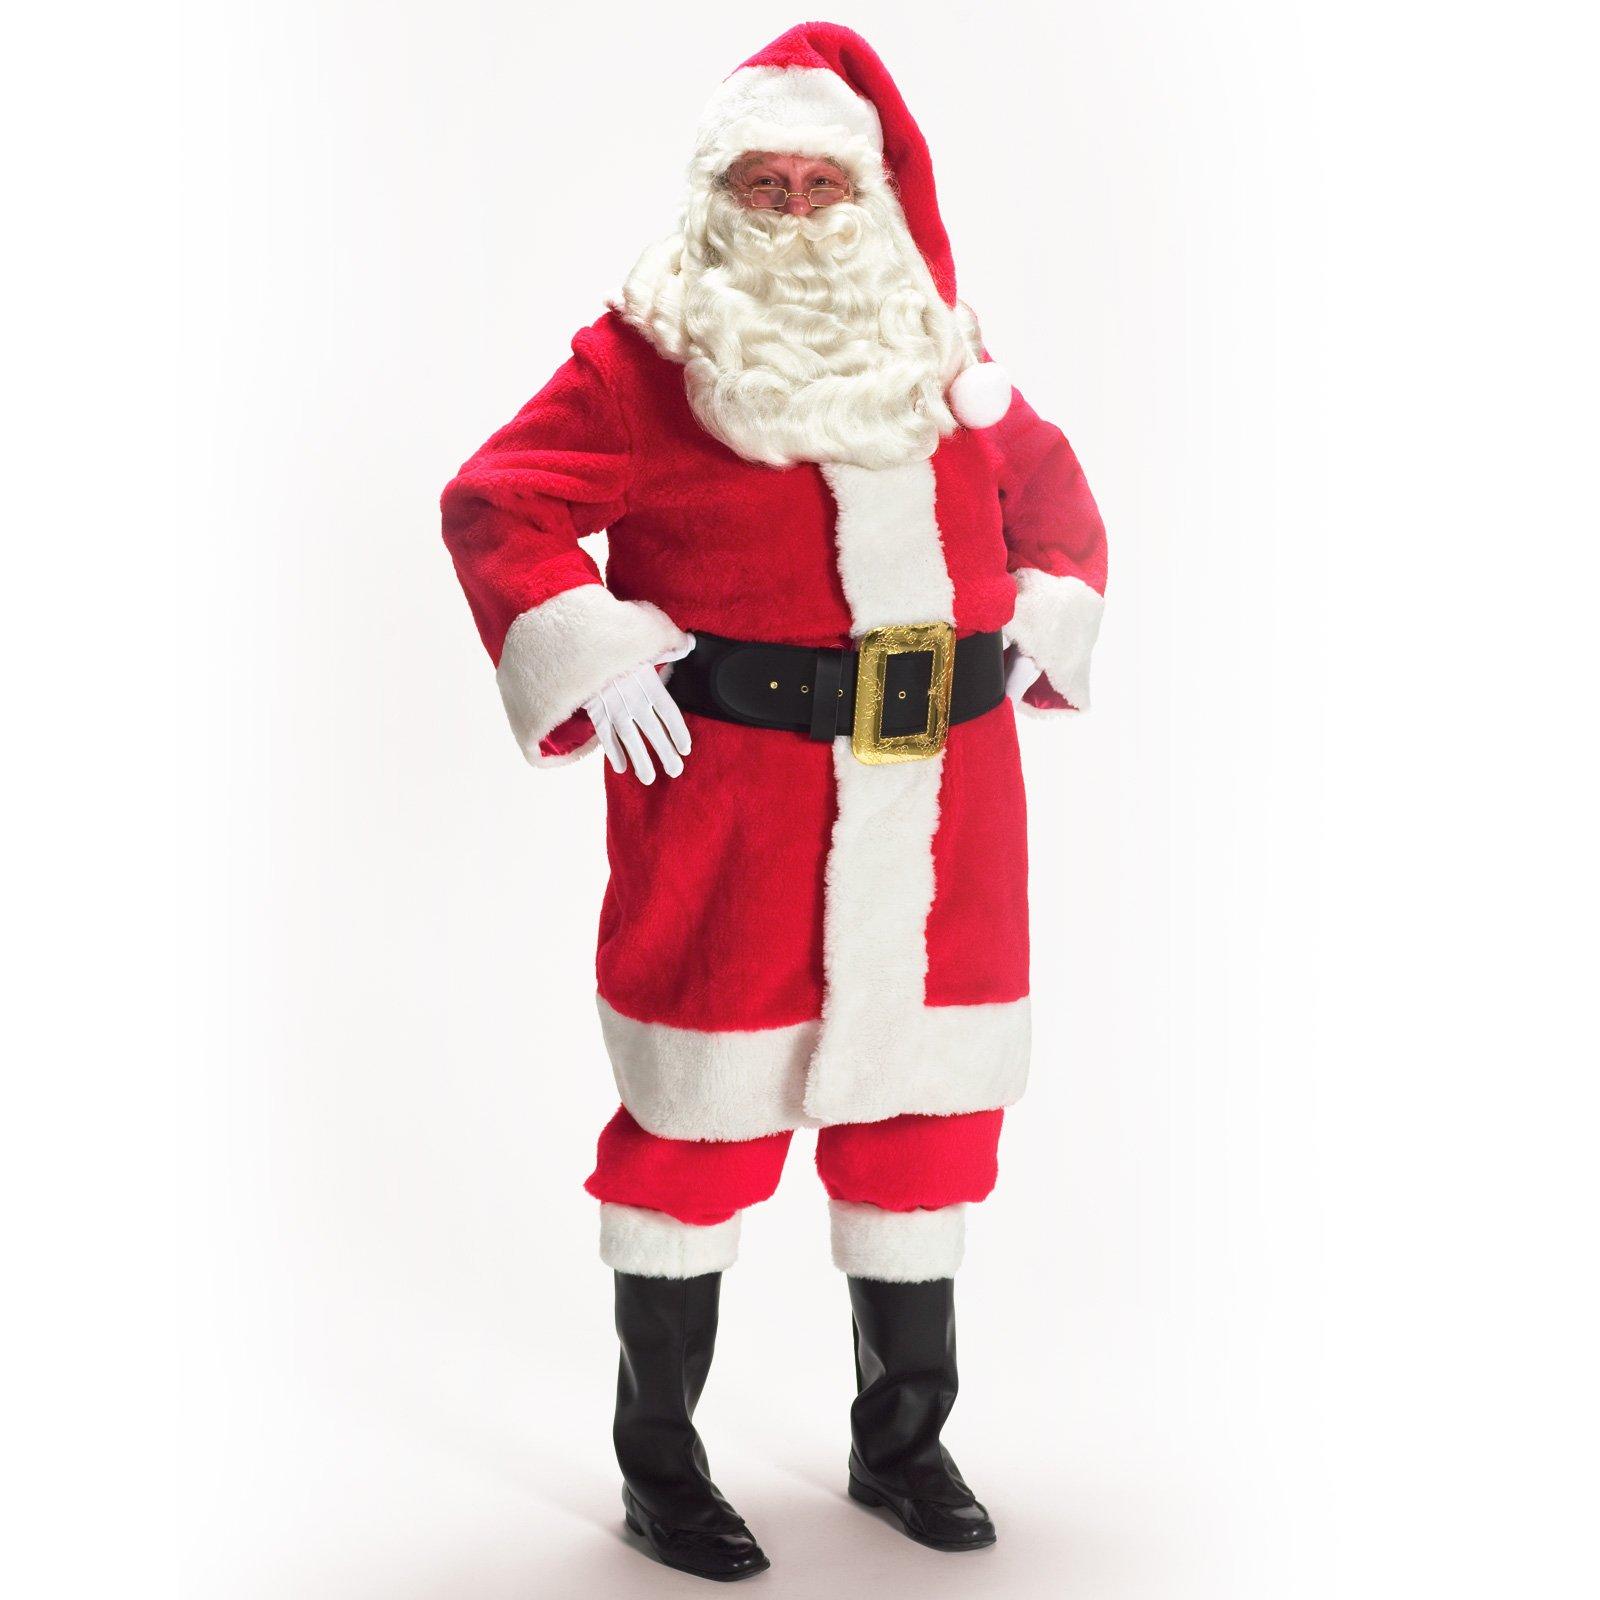 Father Christmas Santa Claus, Picture, Pics